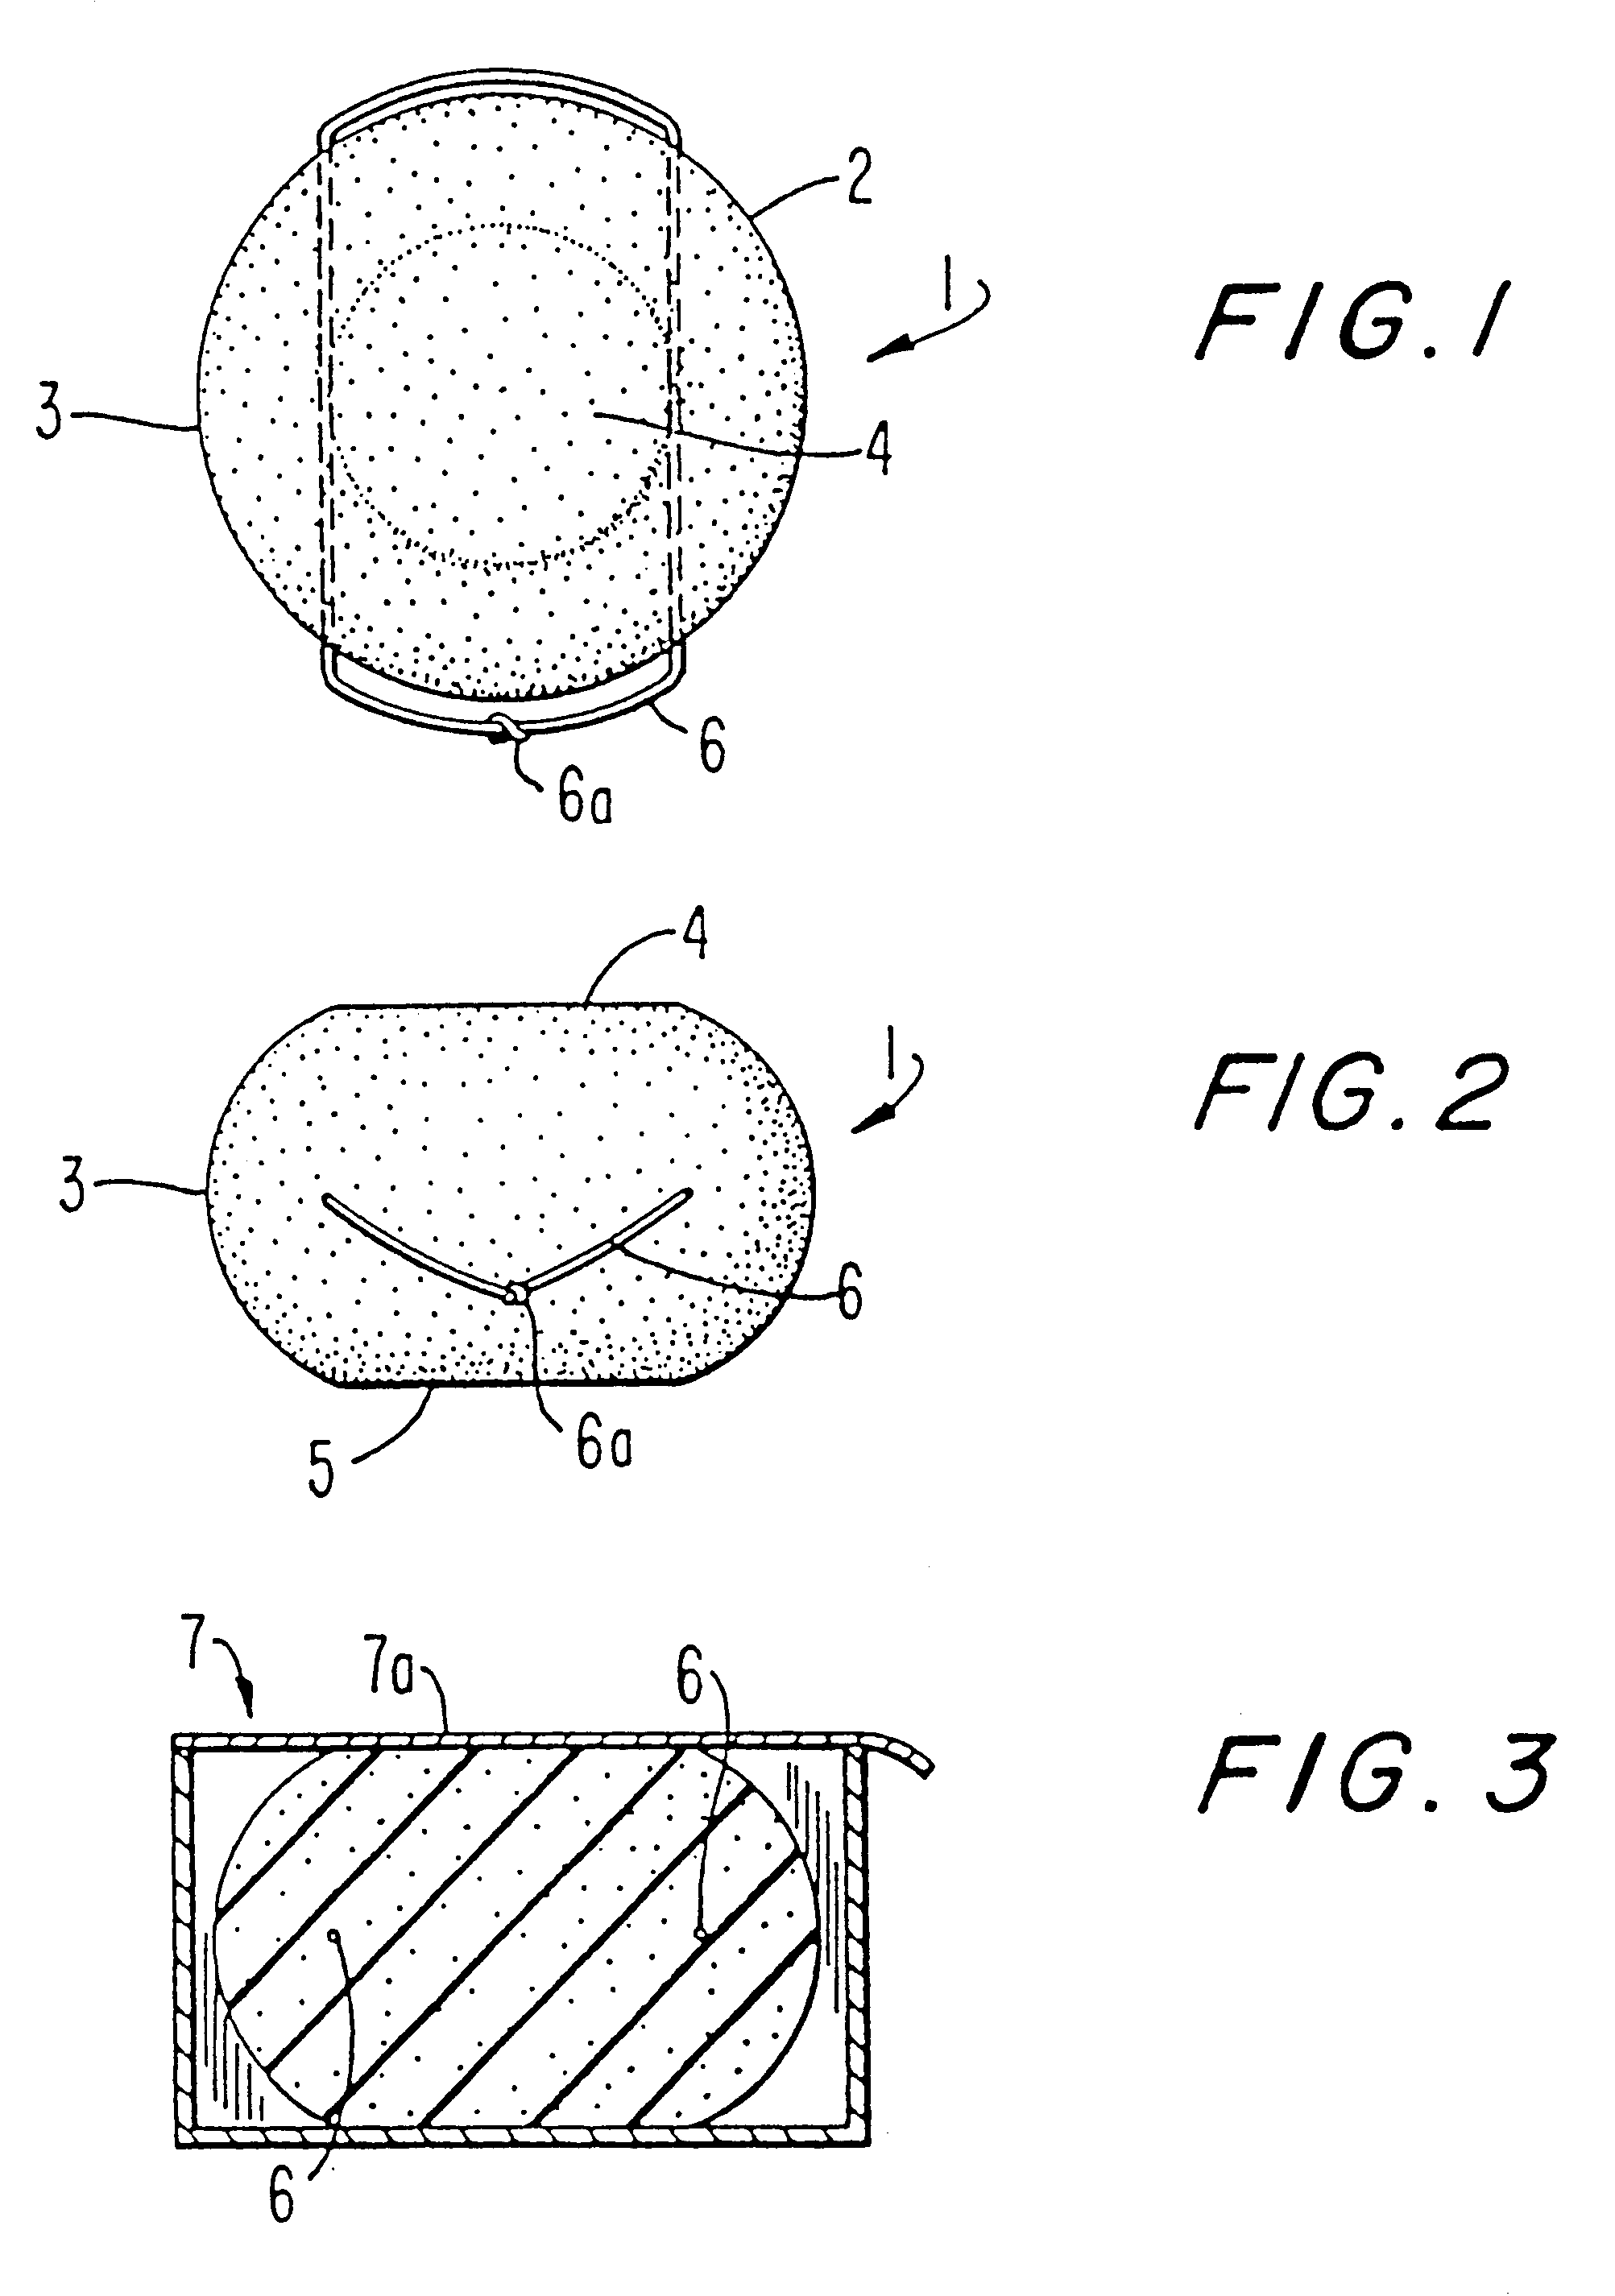 Composition and method for prevention of sexually transmitted diseases, including aids